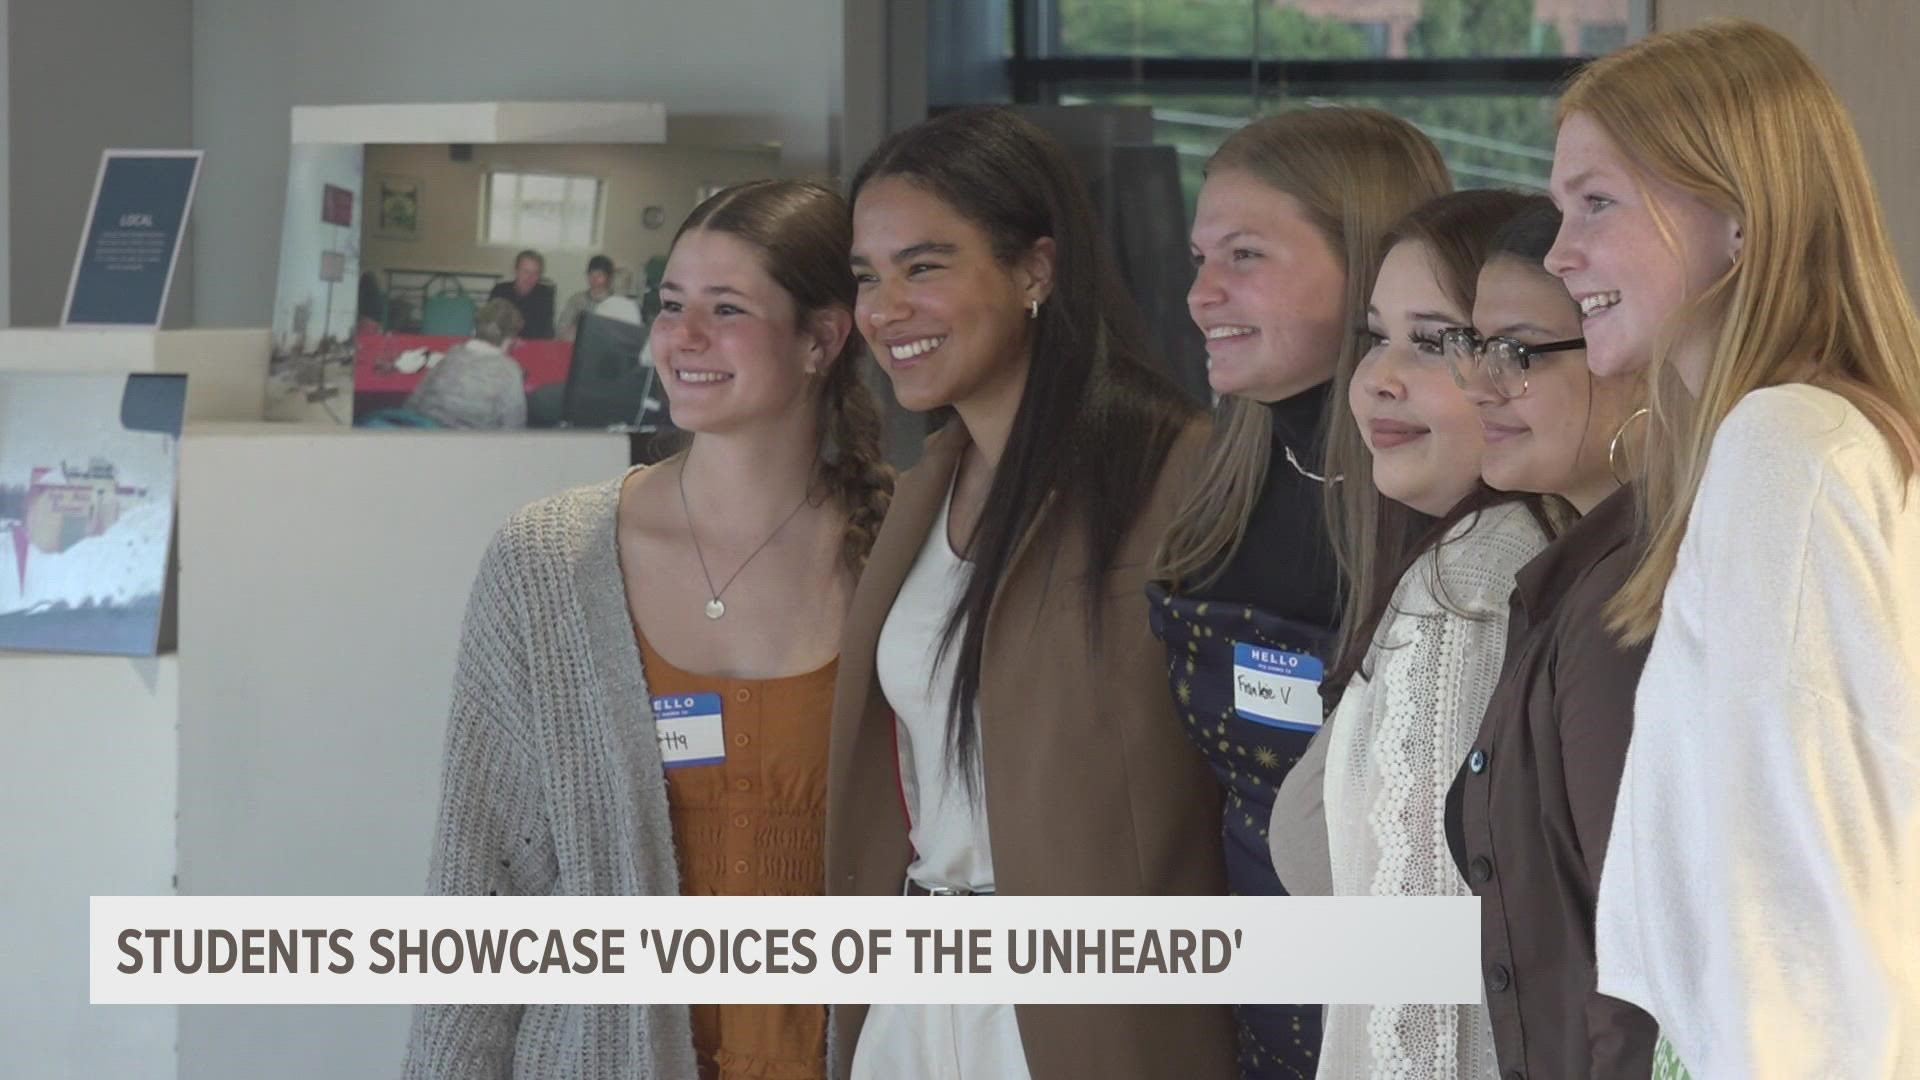 Students from the Young Leaders Against Violence program curated the photo exhibit called "Voices of the Unheard," which went on display Wednesday night.